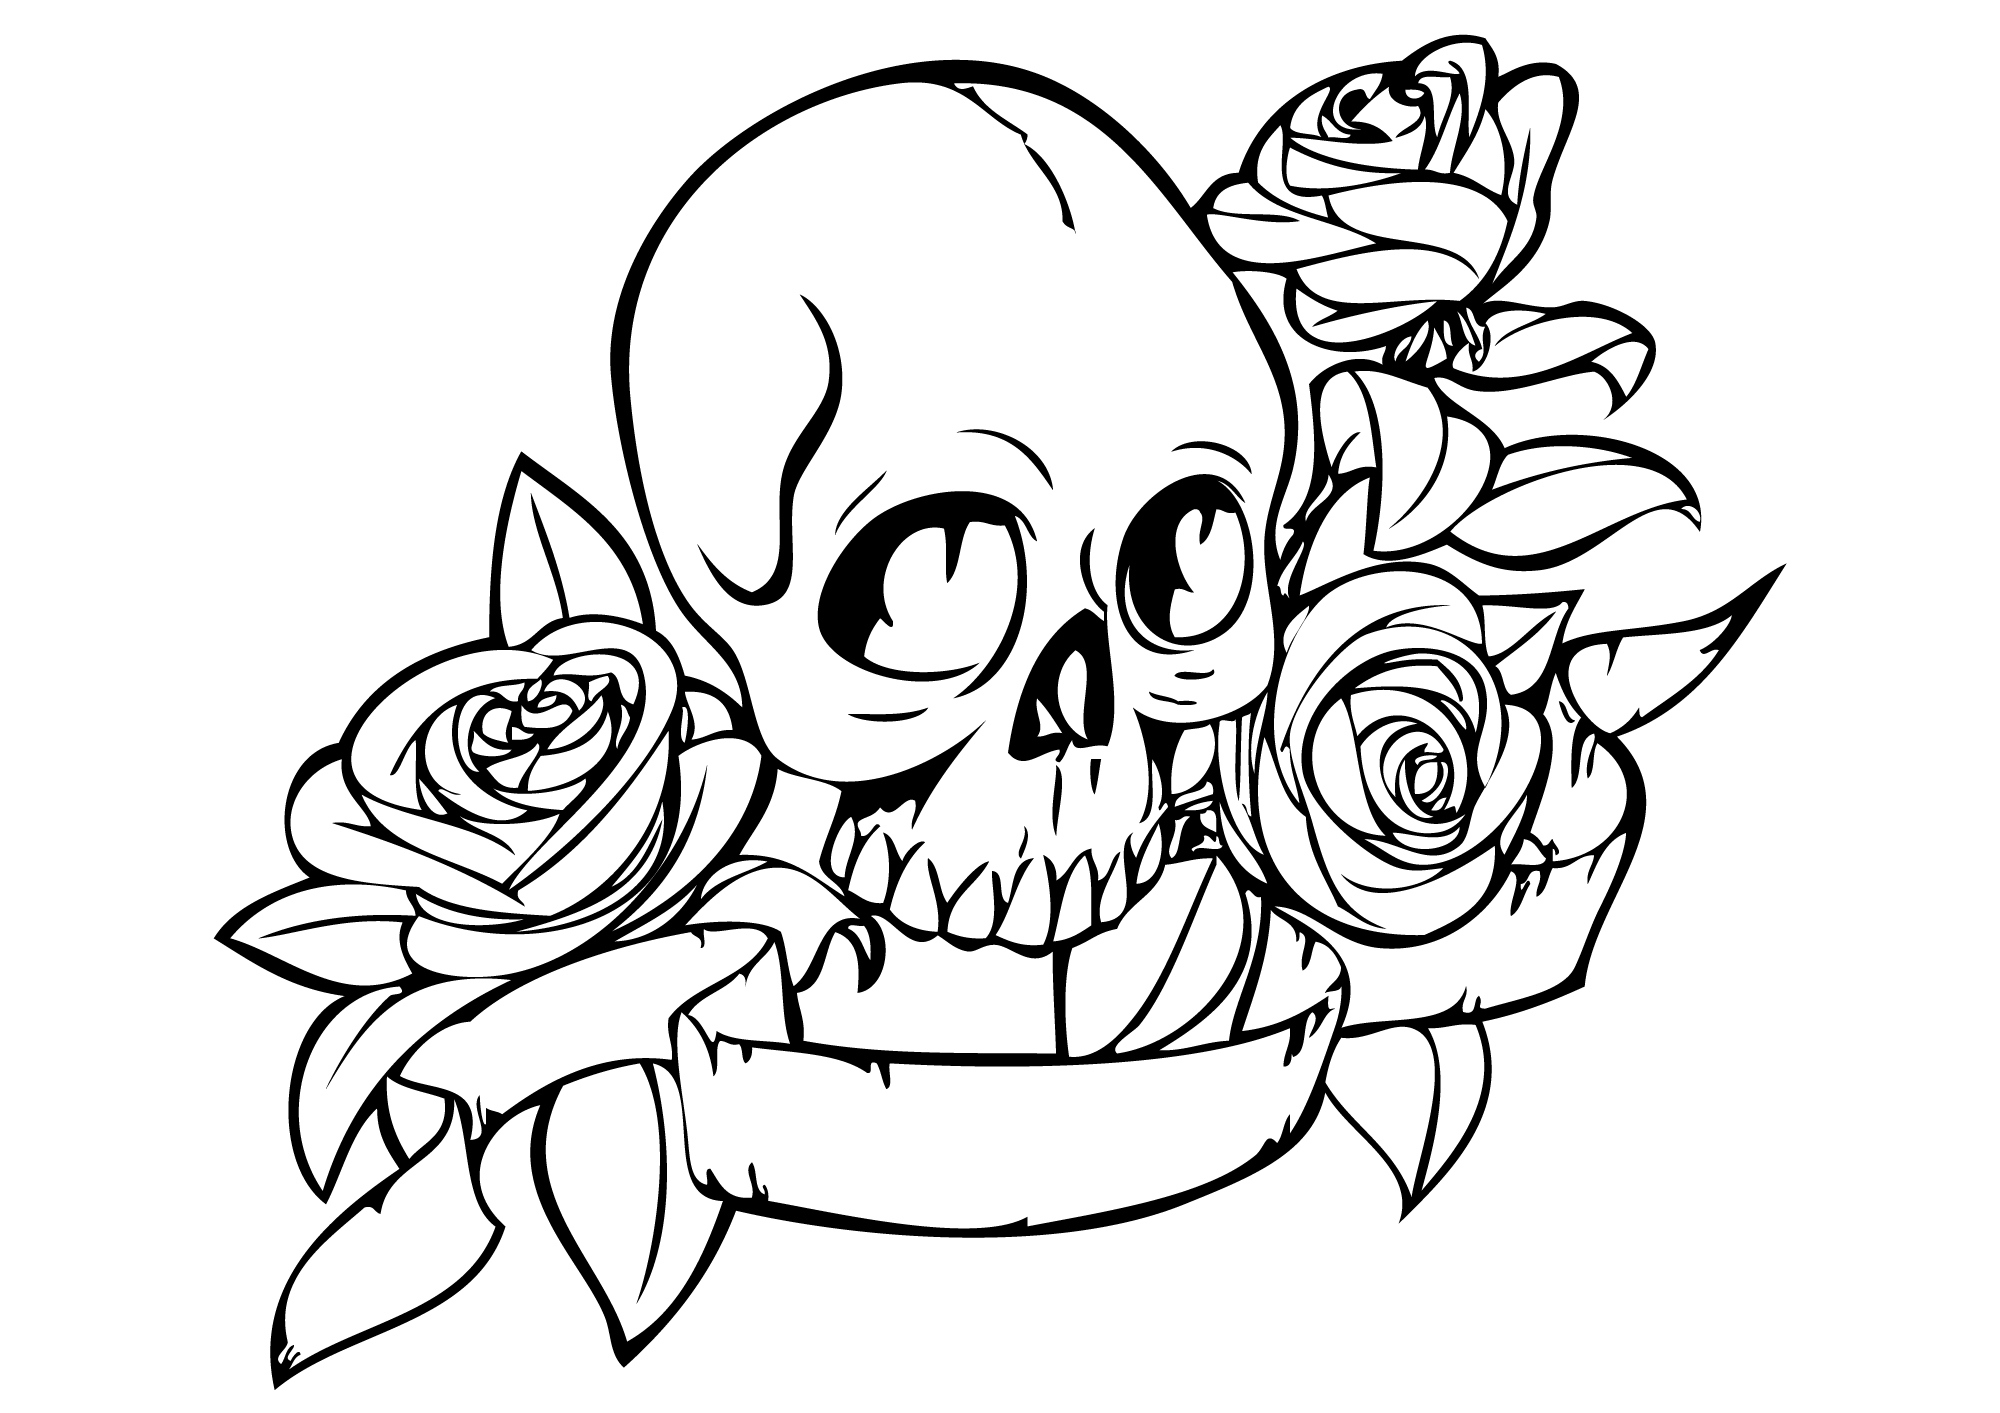 Skull And Roses Coloring Pages at GetColorings.com | Free printable